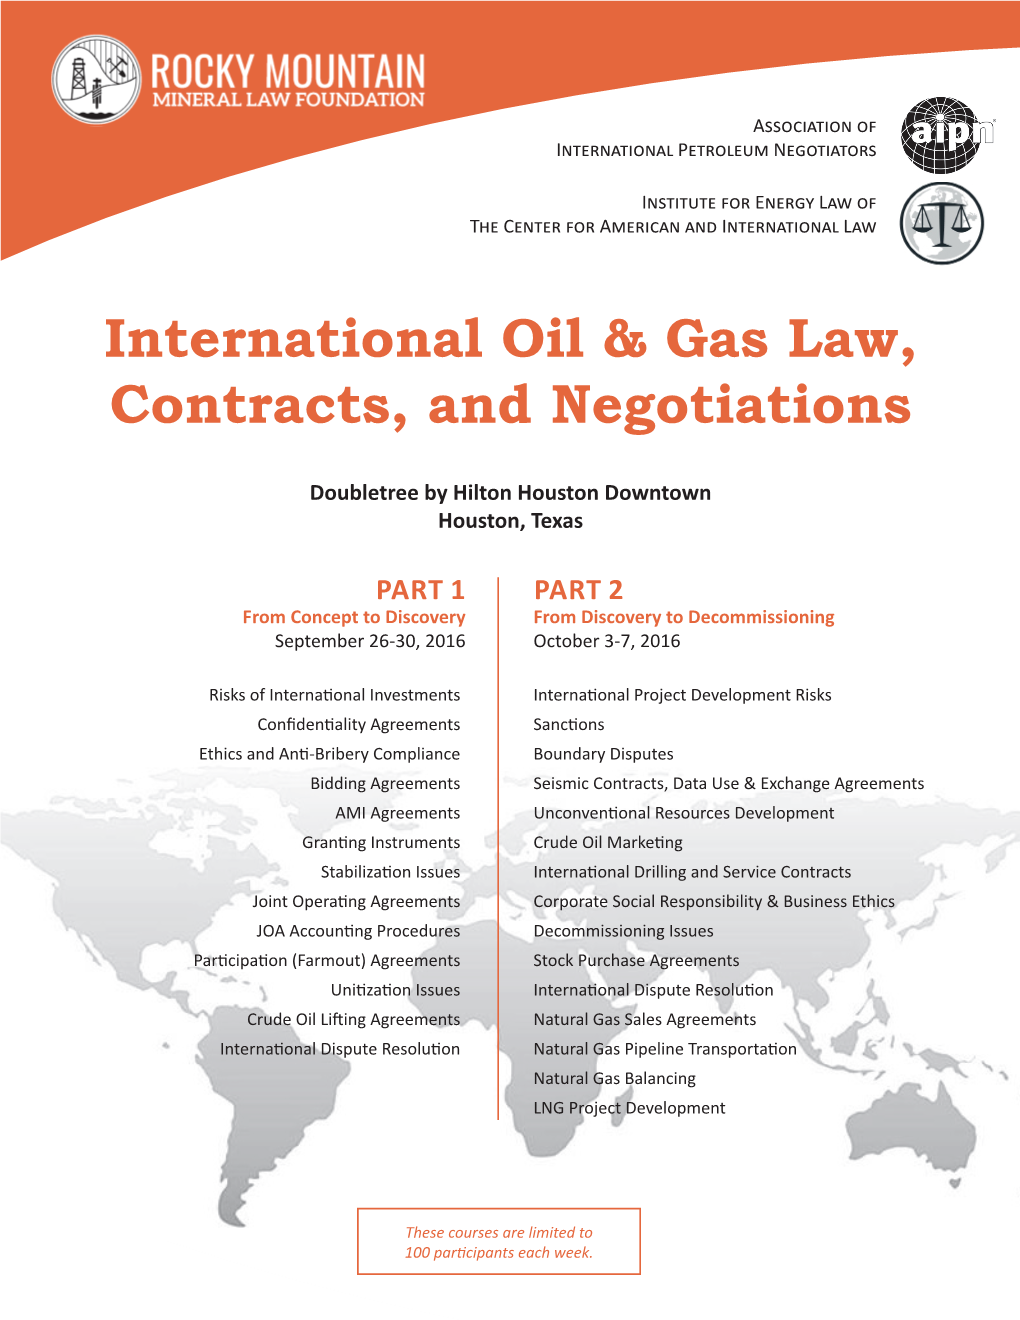 International Oil & Gas Law, Contracts, and Negotiations